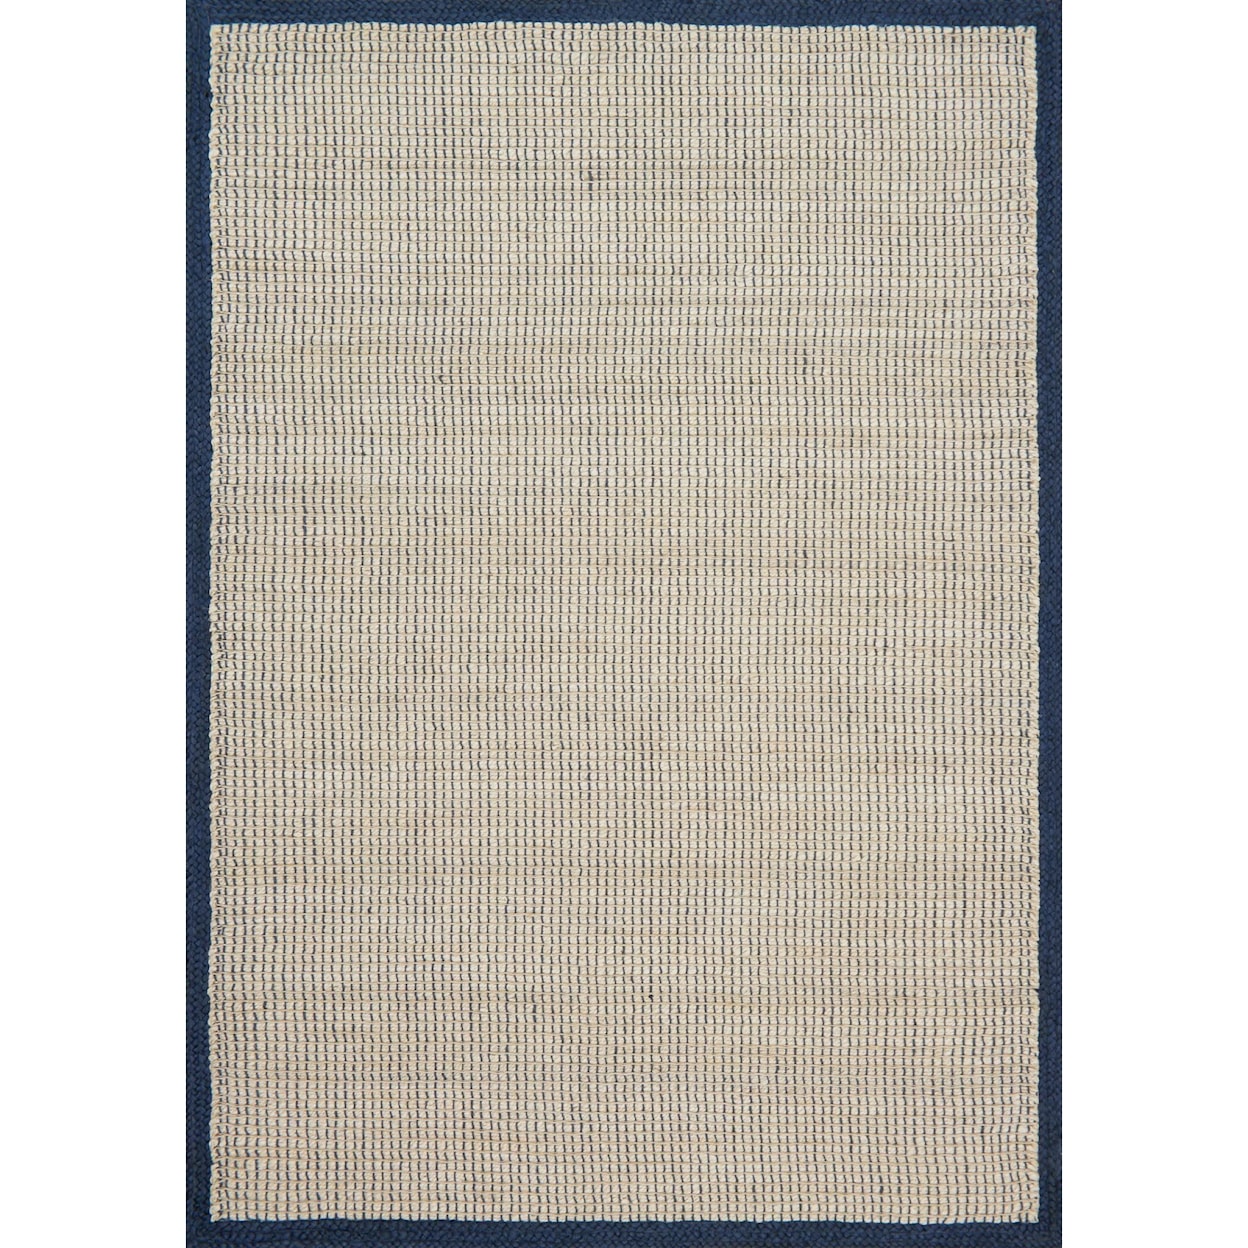 Magnolia Home by Joanna Gaines for Loloi Sydney 3' 6" x 5' 6" Rectangle Rug